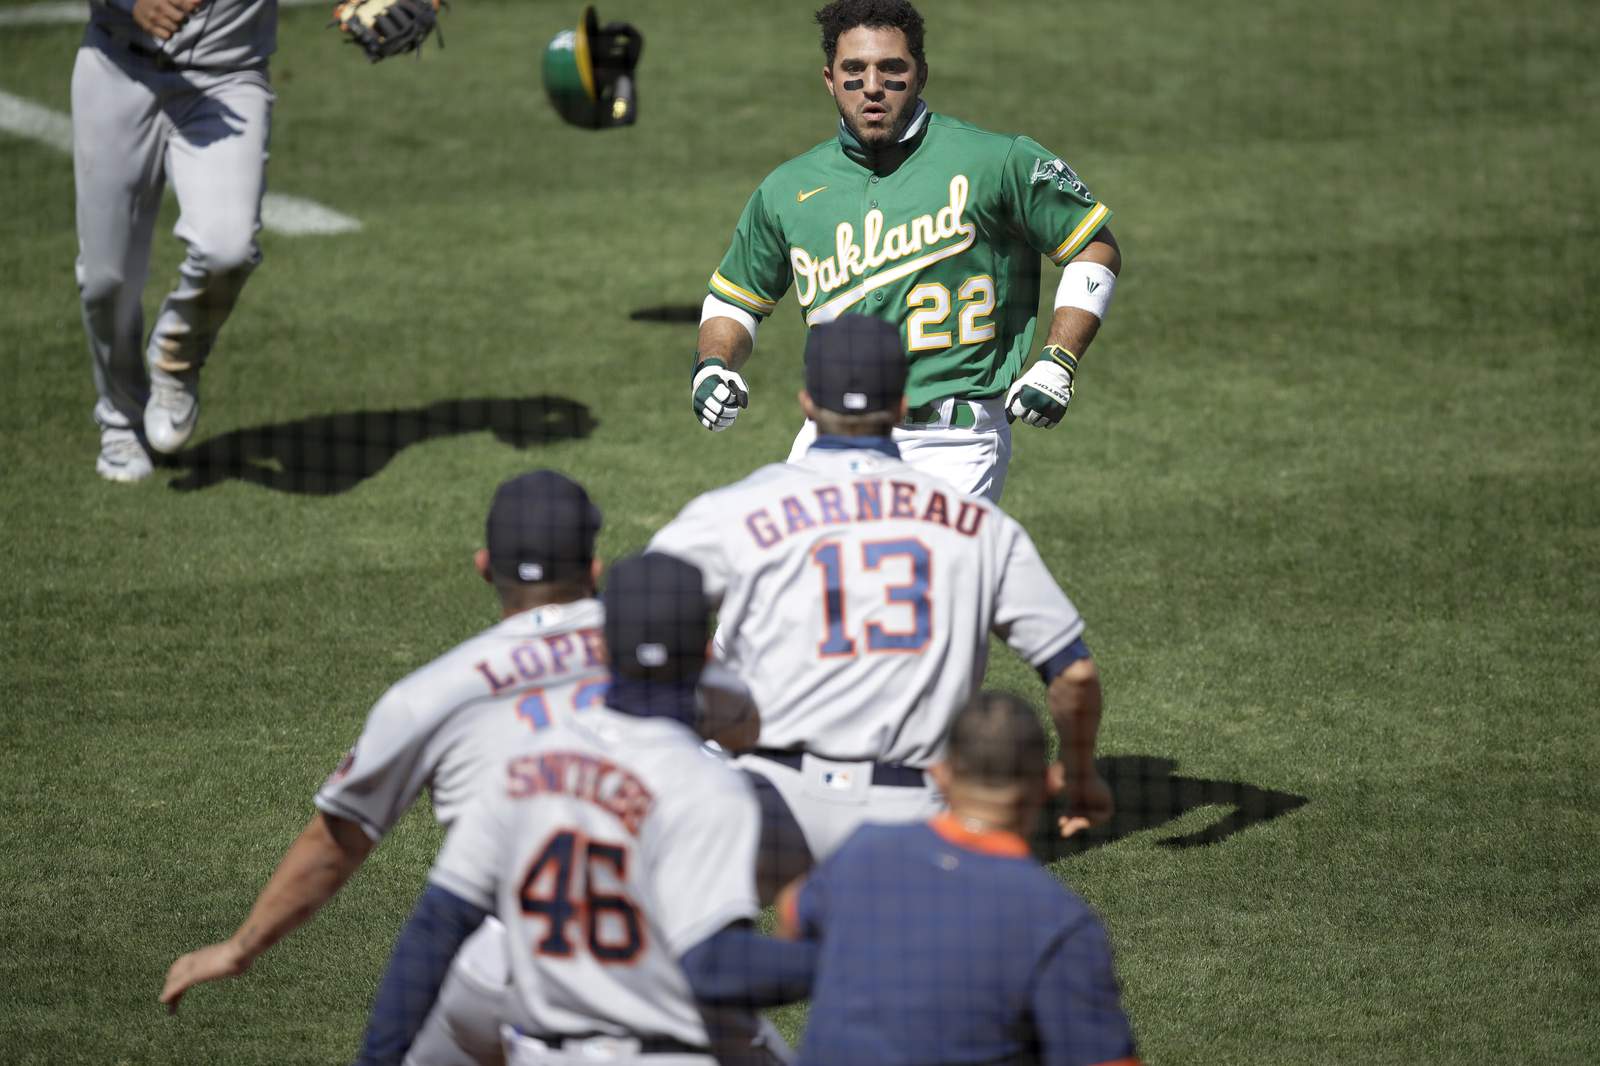 LEADING OFF: A's try for 10th win in row, wait for MLB word